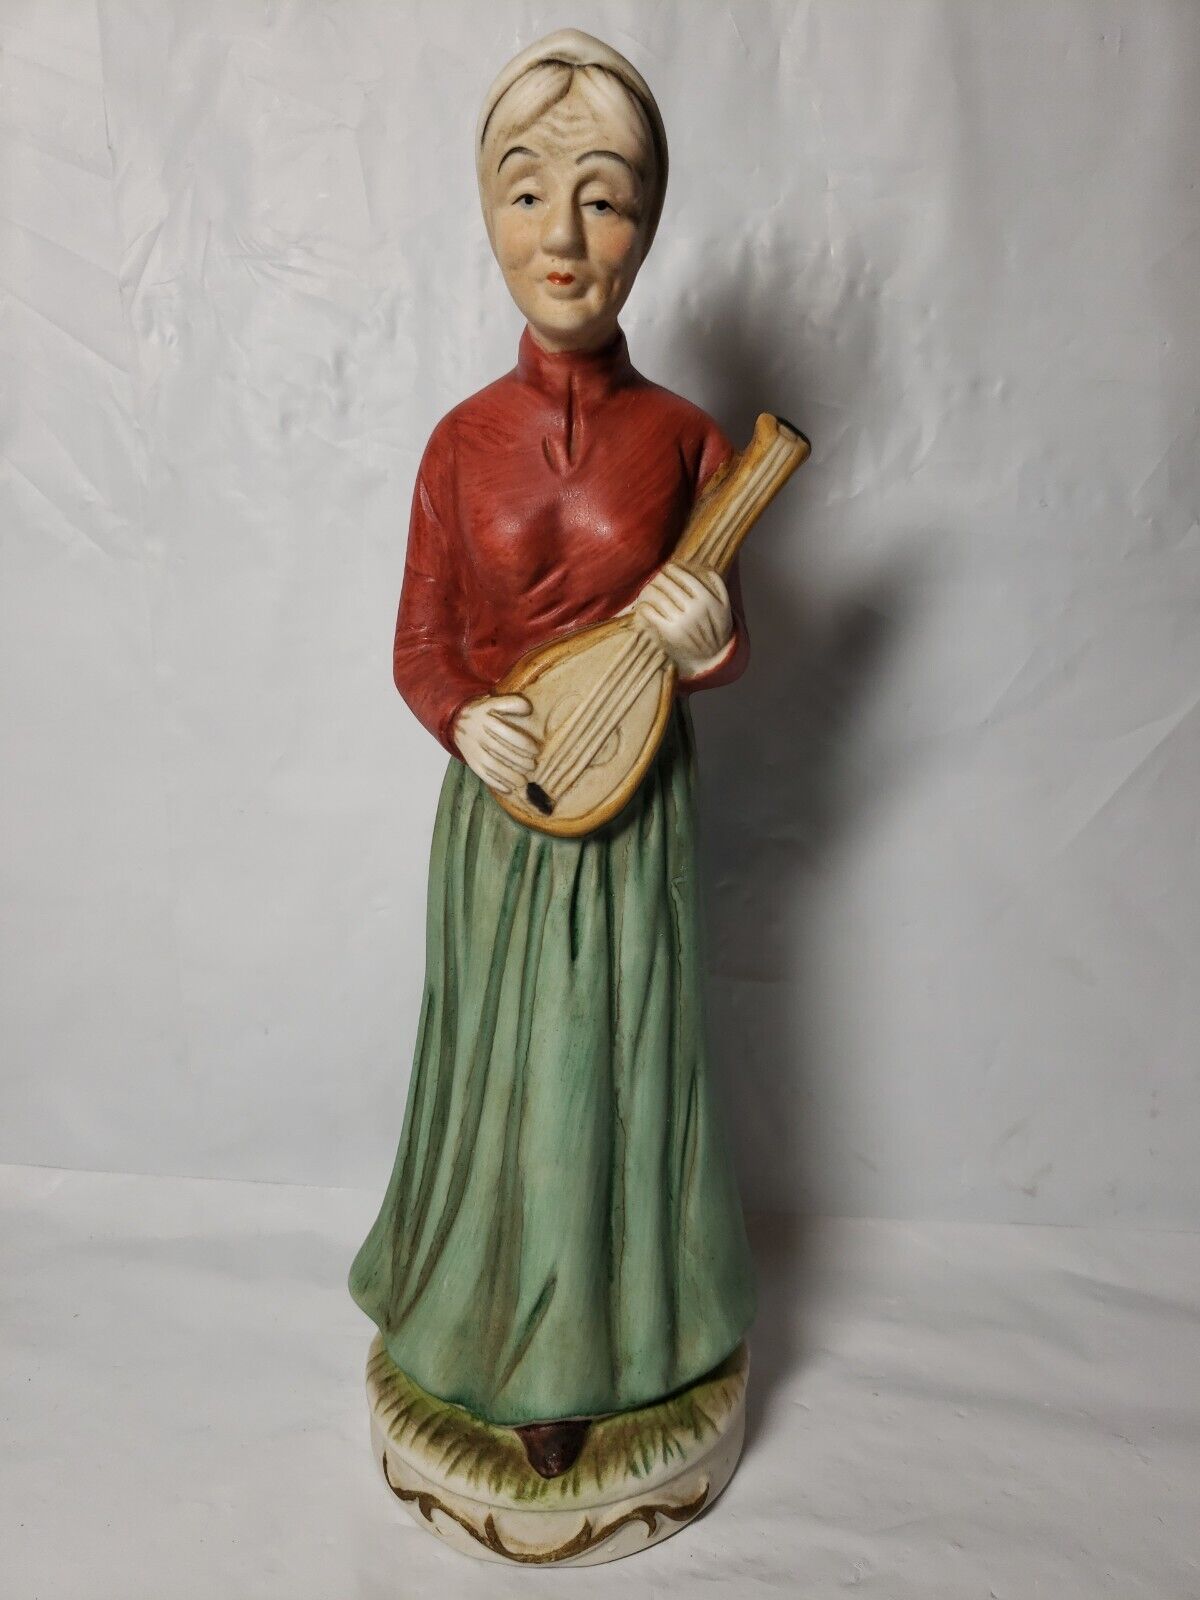 Vintage Ceramic Figurine Woman With A Guitar